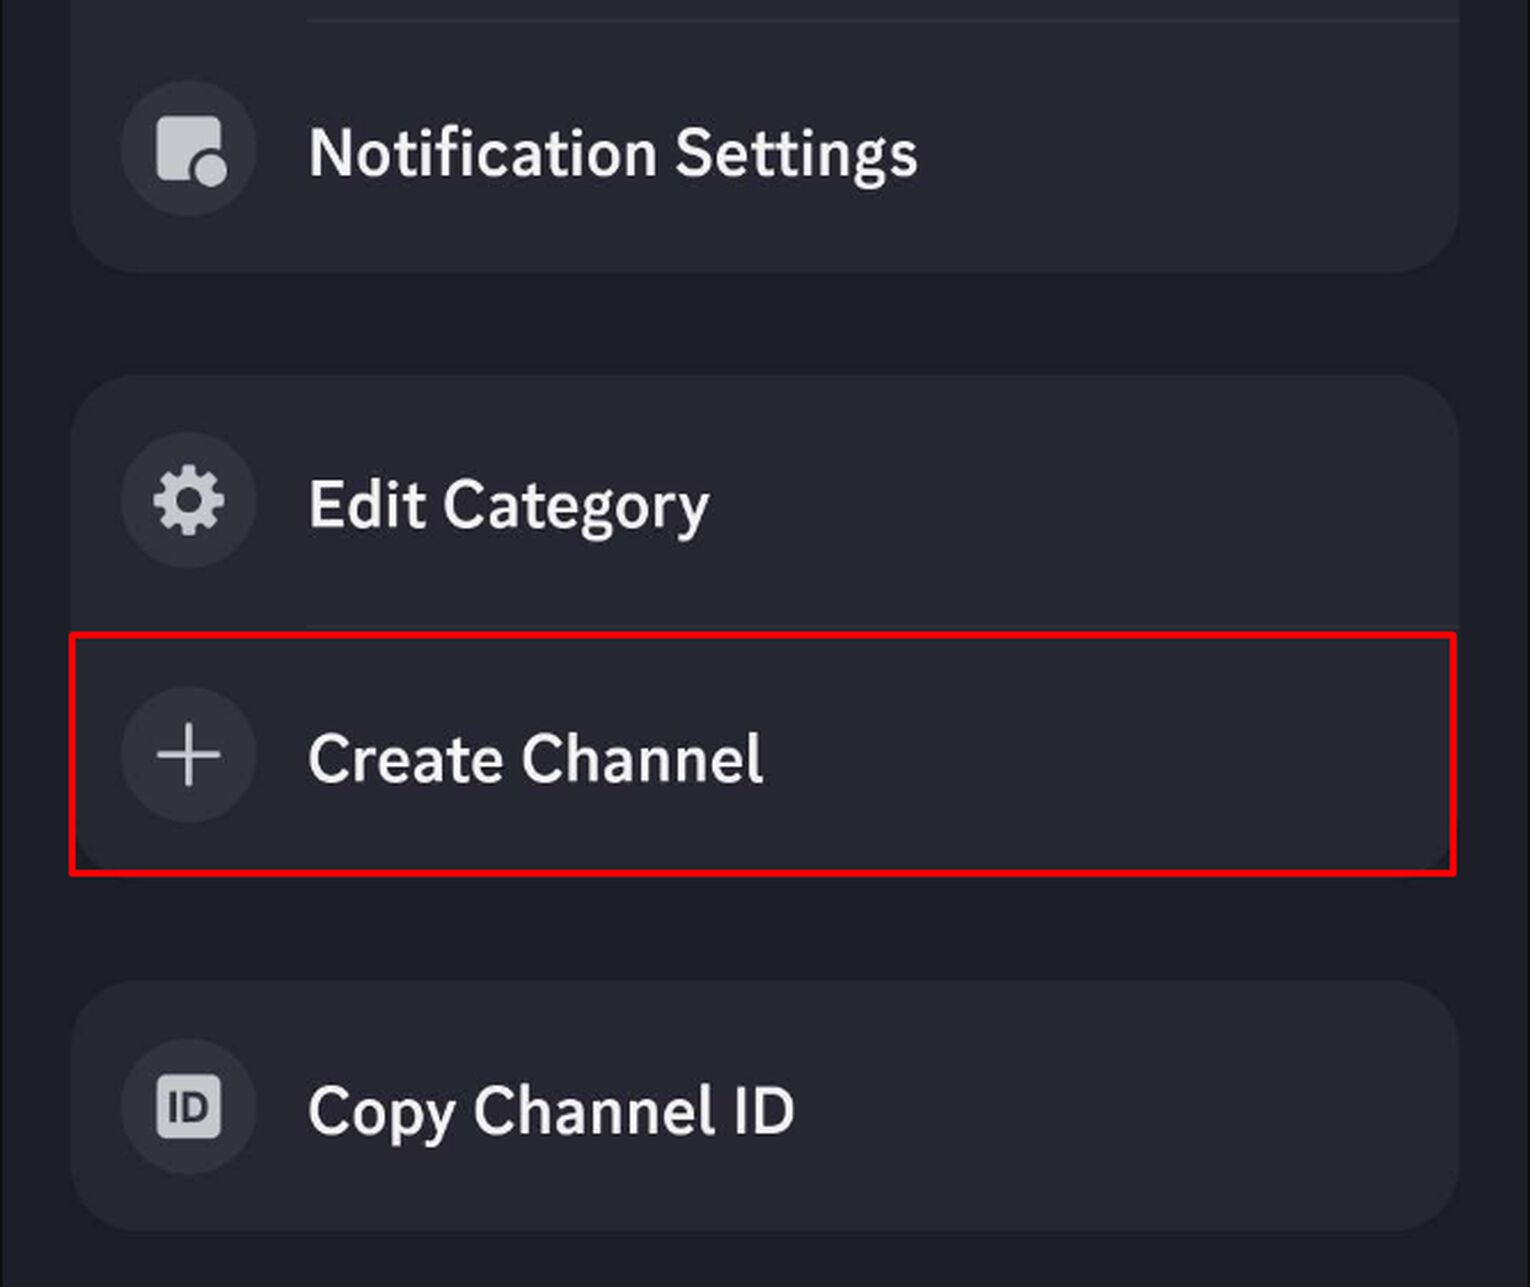 Go To “Create Channel”